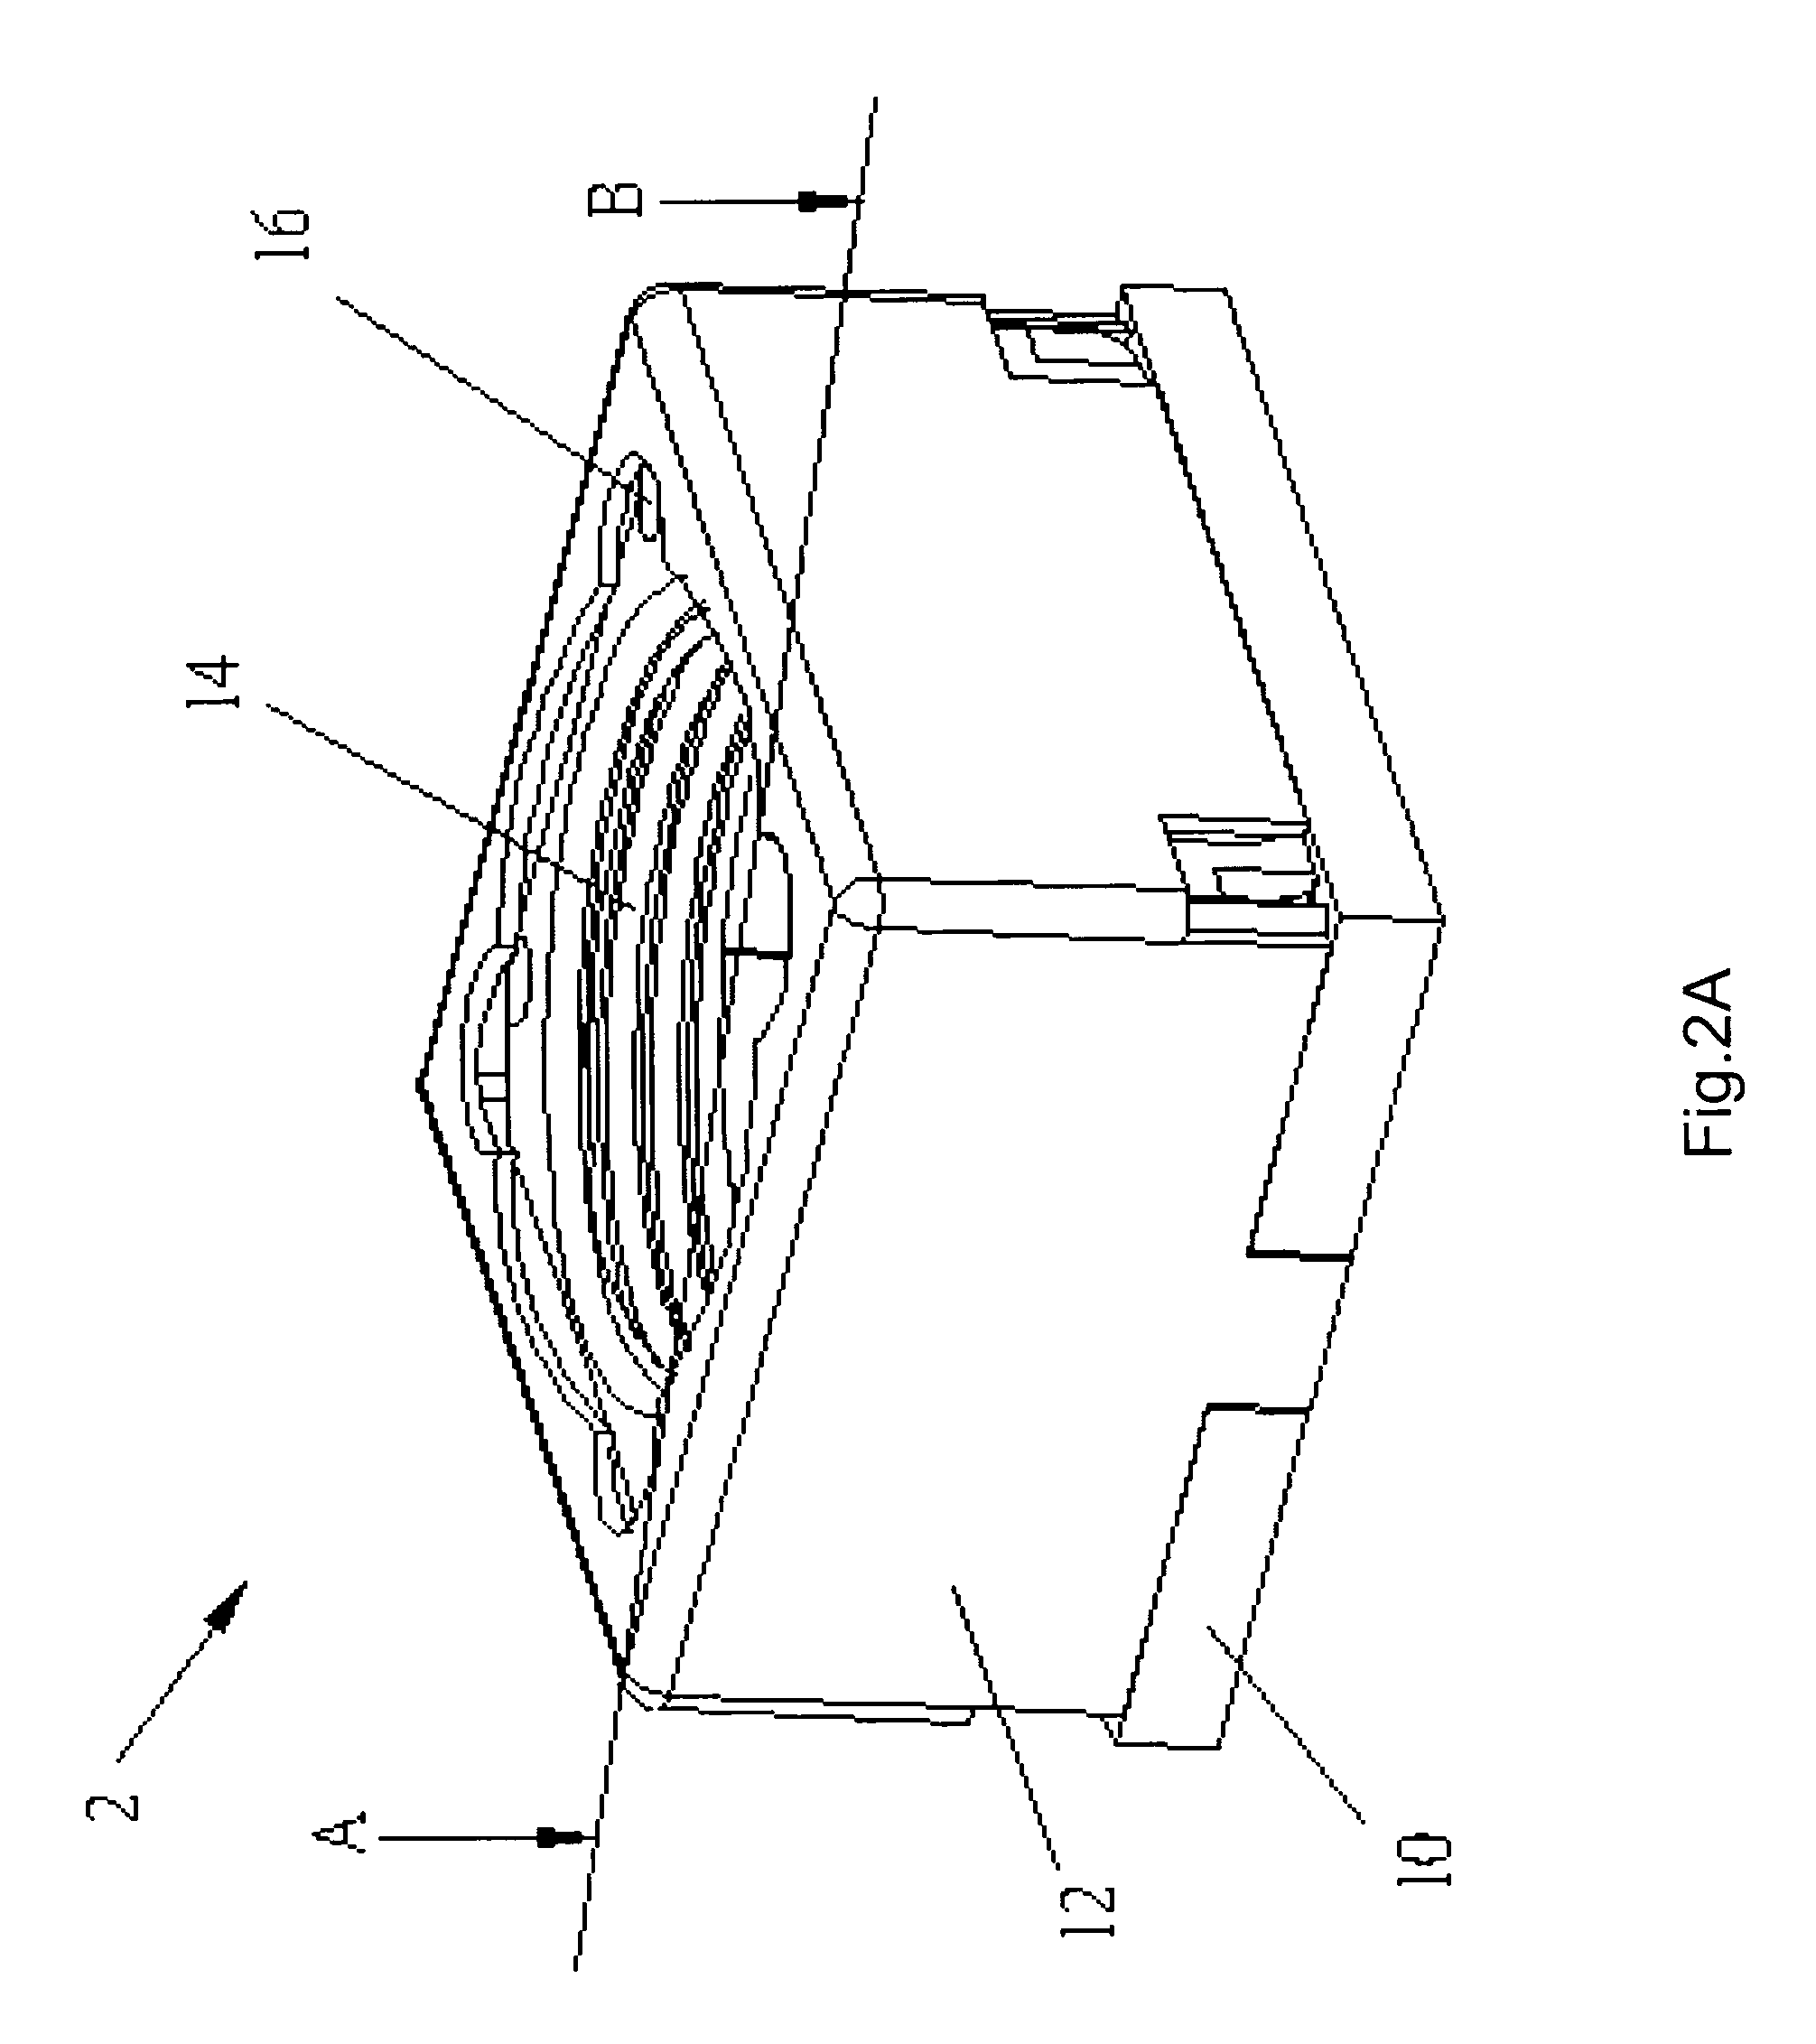 Low power voice coil motor with a guiding magnet shell